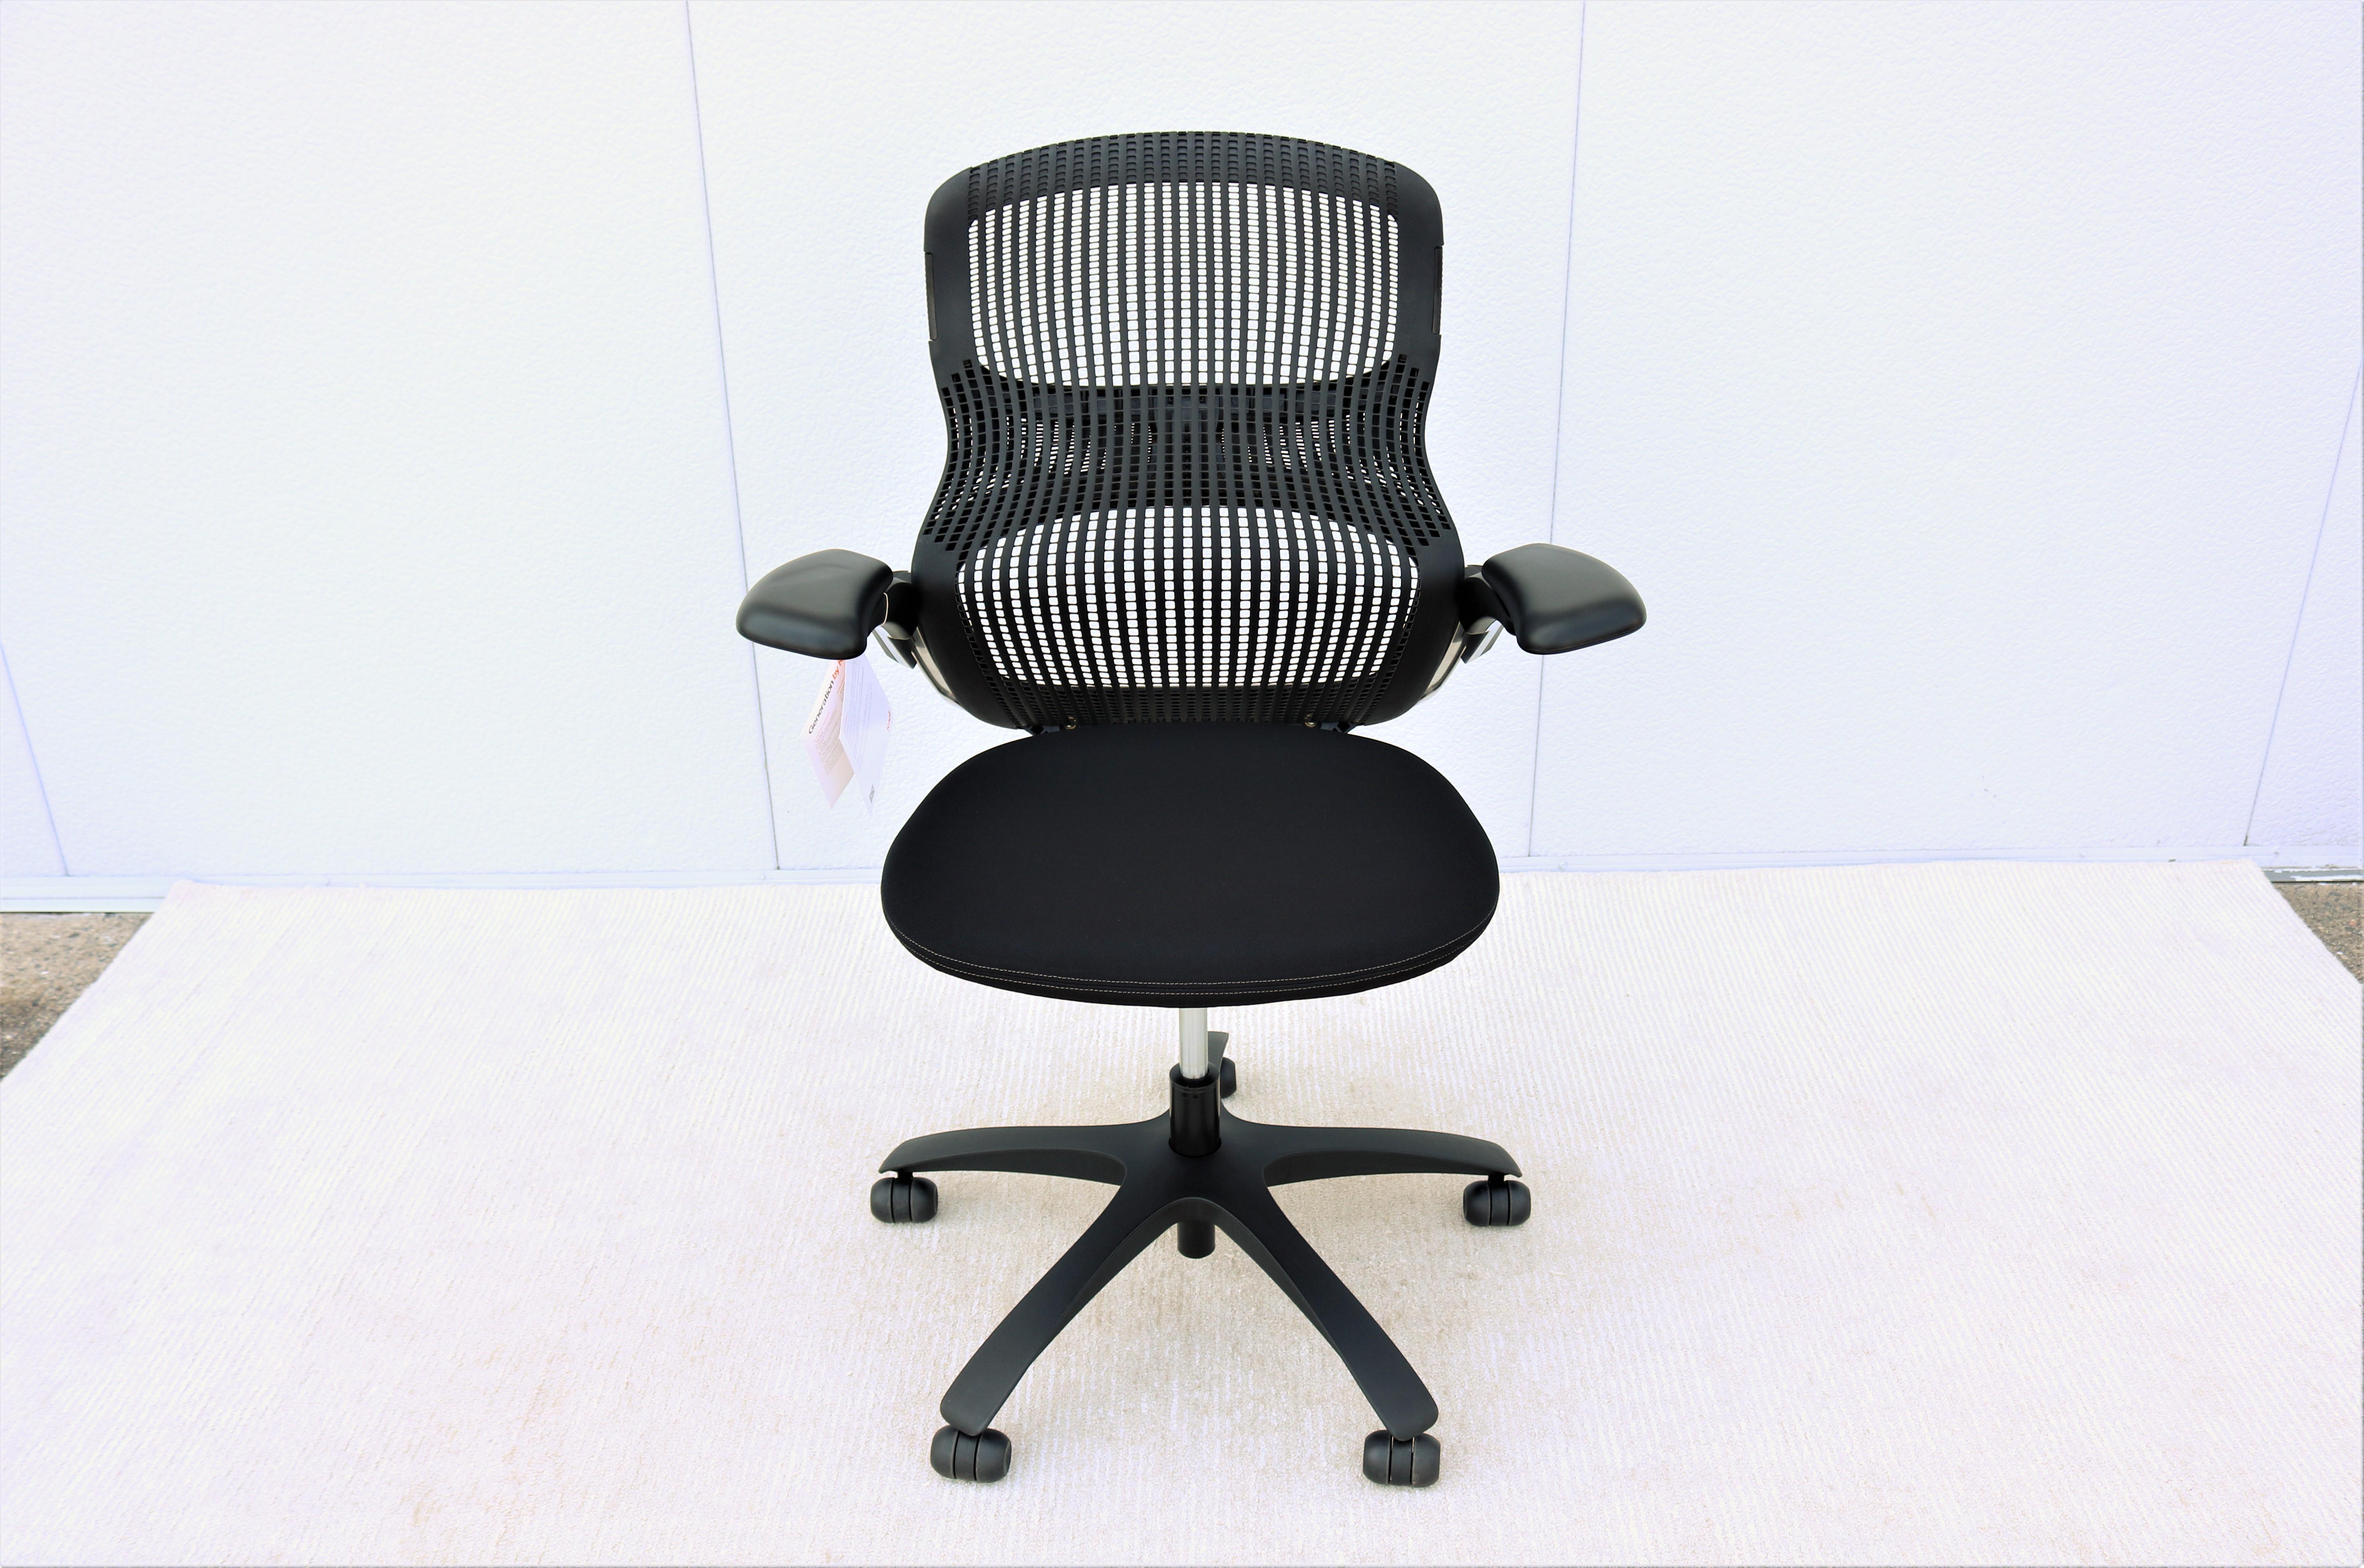 Painted Knoll Generation Black Ergonomic Office Desk Chair Fully Adjustable, Brand New For Sale